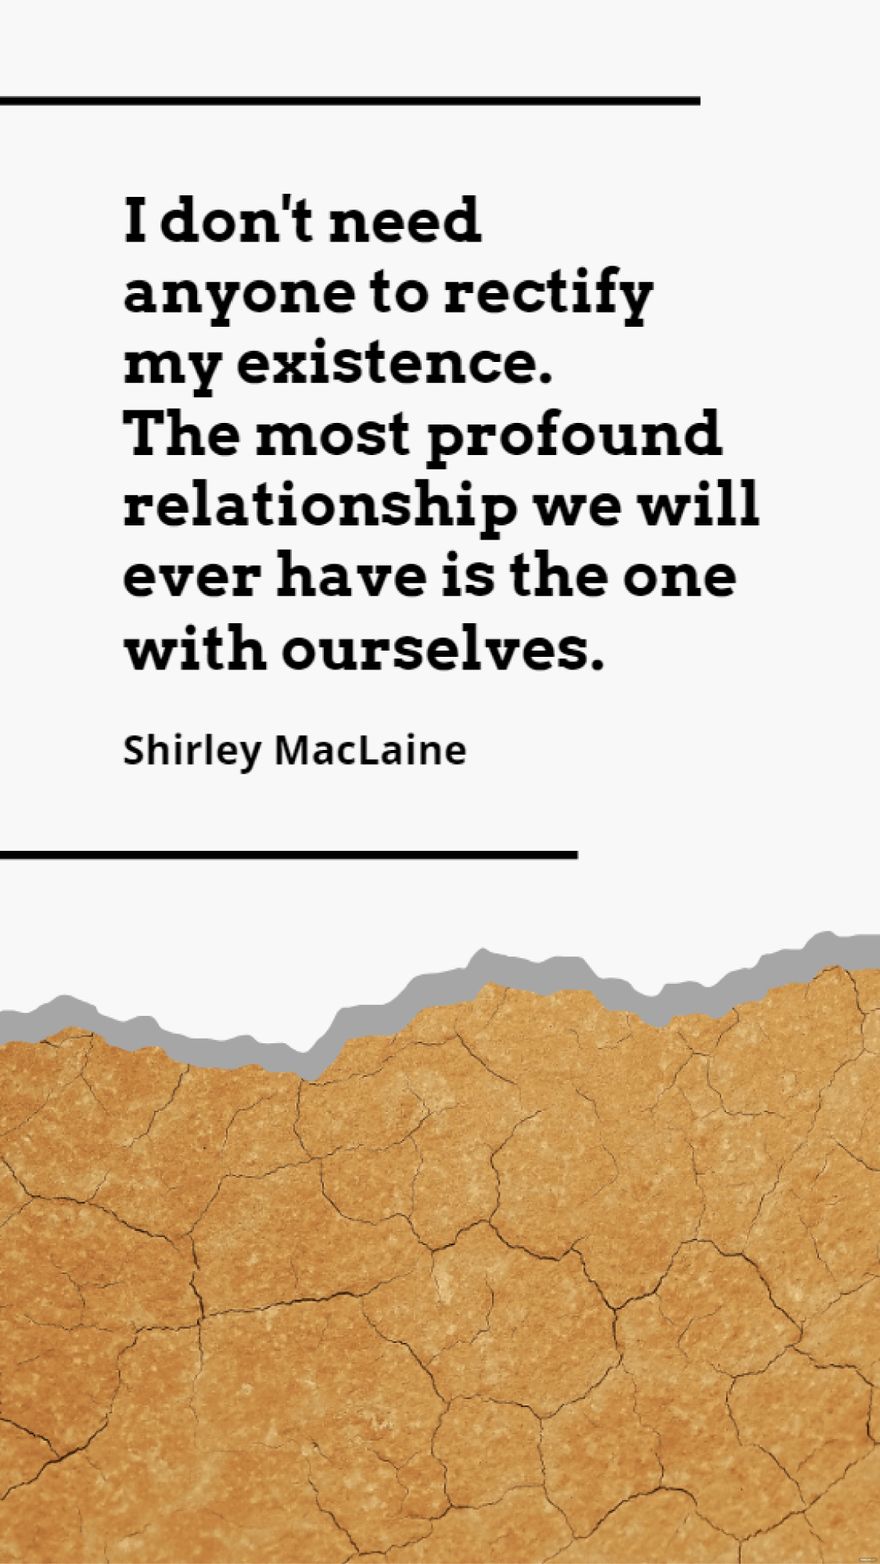 Shirley MacLaine - I don't need anyone to rectify my existence. The most profound relationship we will ever have is the one with ourselves.